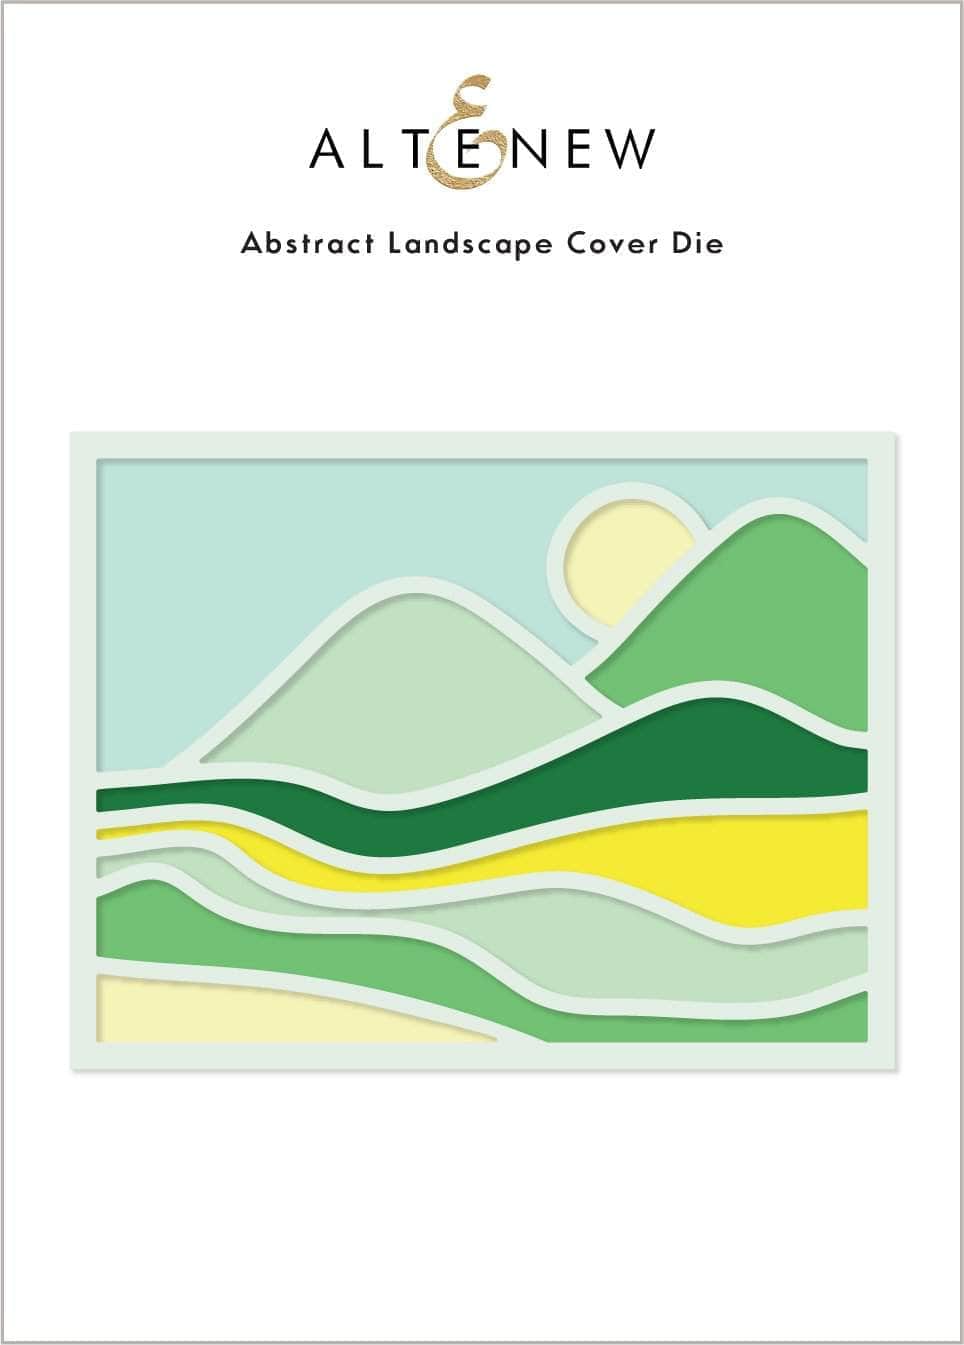 Dies Abstract Landscape Cover Die